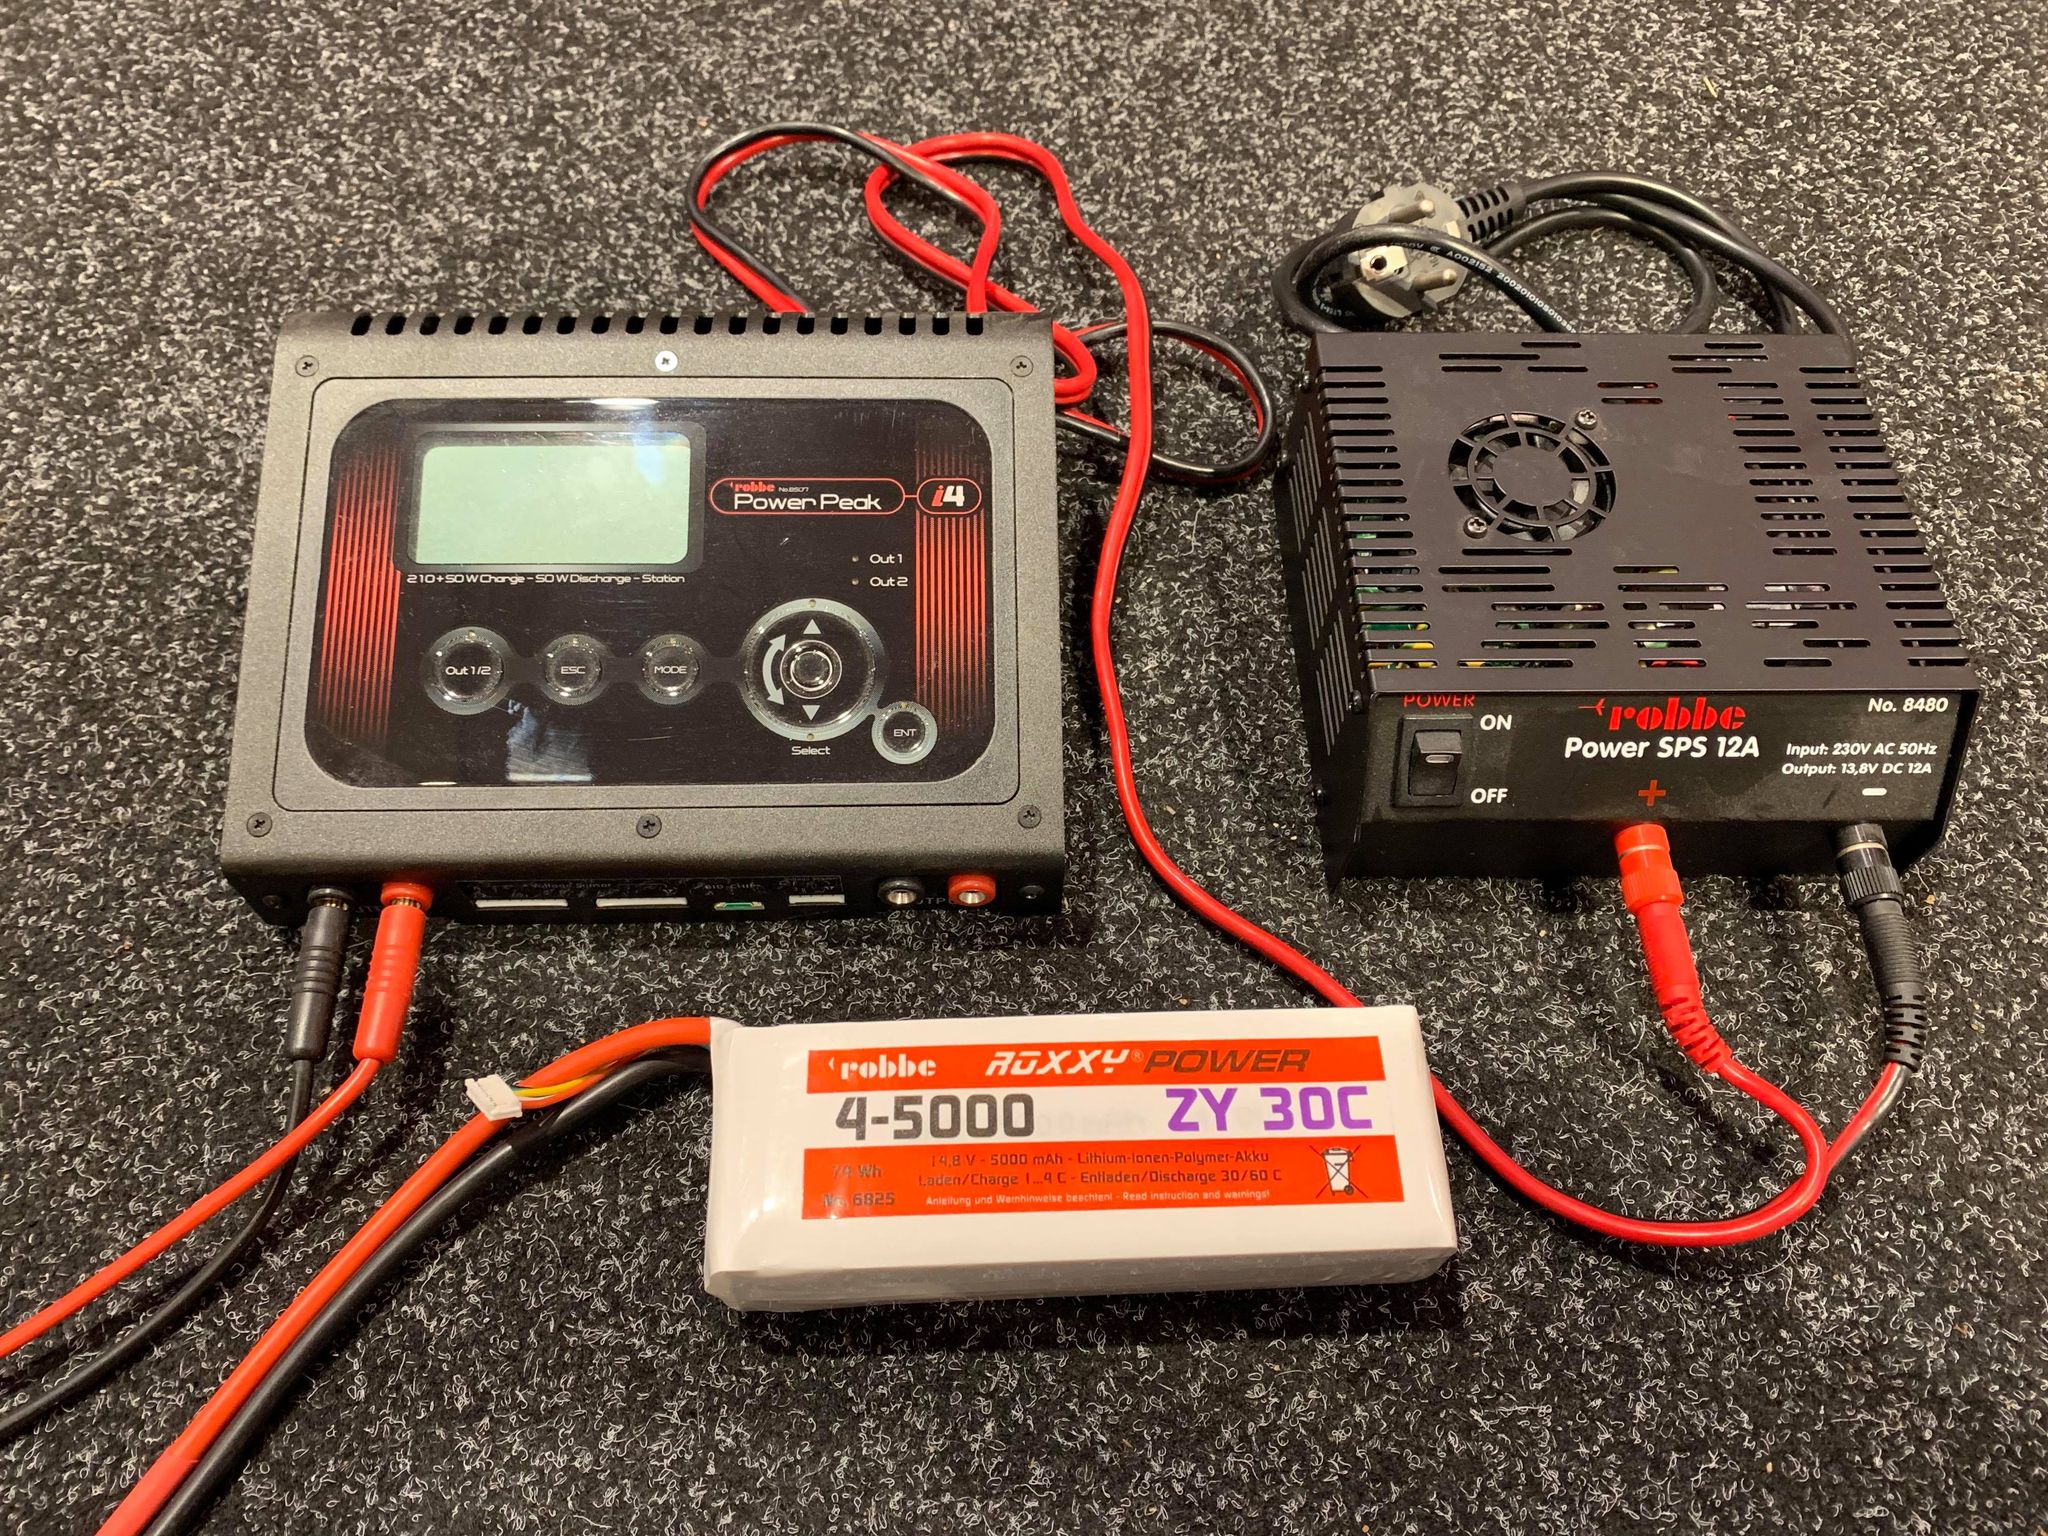 Robbe power systeem met 4S 5000mah lipo accu / lipo lader / 12A voeding!